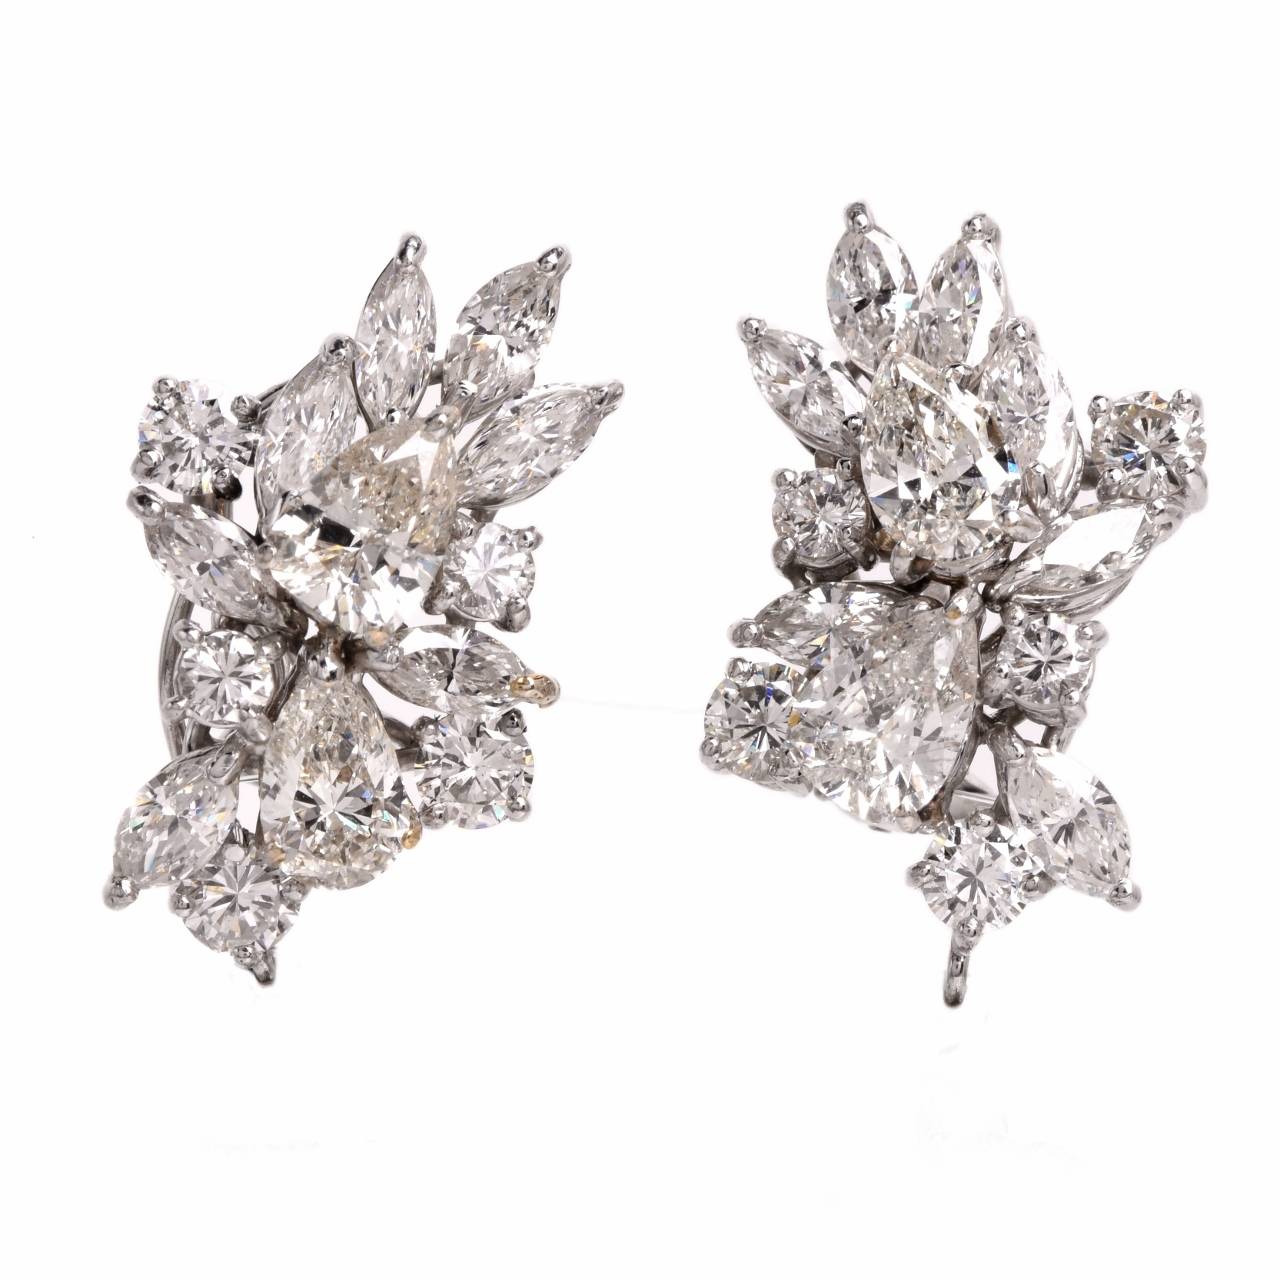 These conspicuous estate pendant earrings of sophisticated aesthetic allure are fashioned in two detachable parts, offering versatility of style, to be worn with or without the diamond and emerald pendant constituent. They are crafted in solid